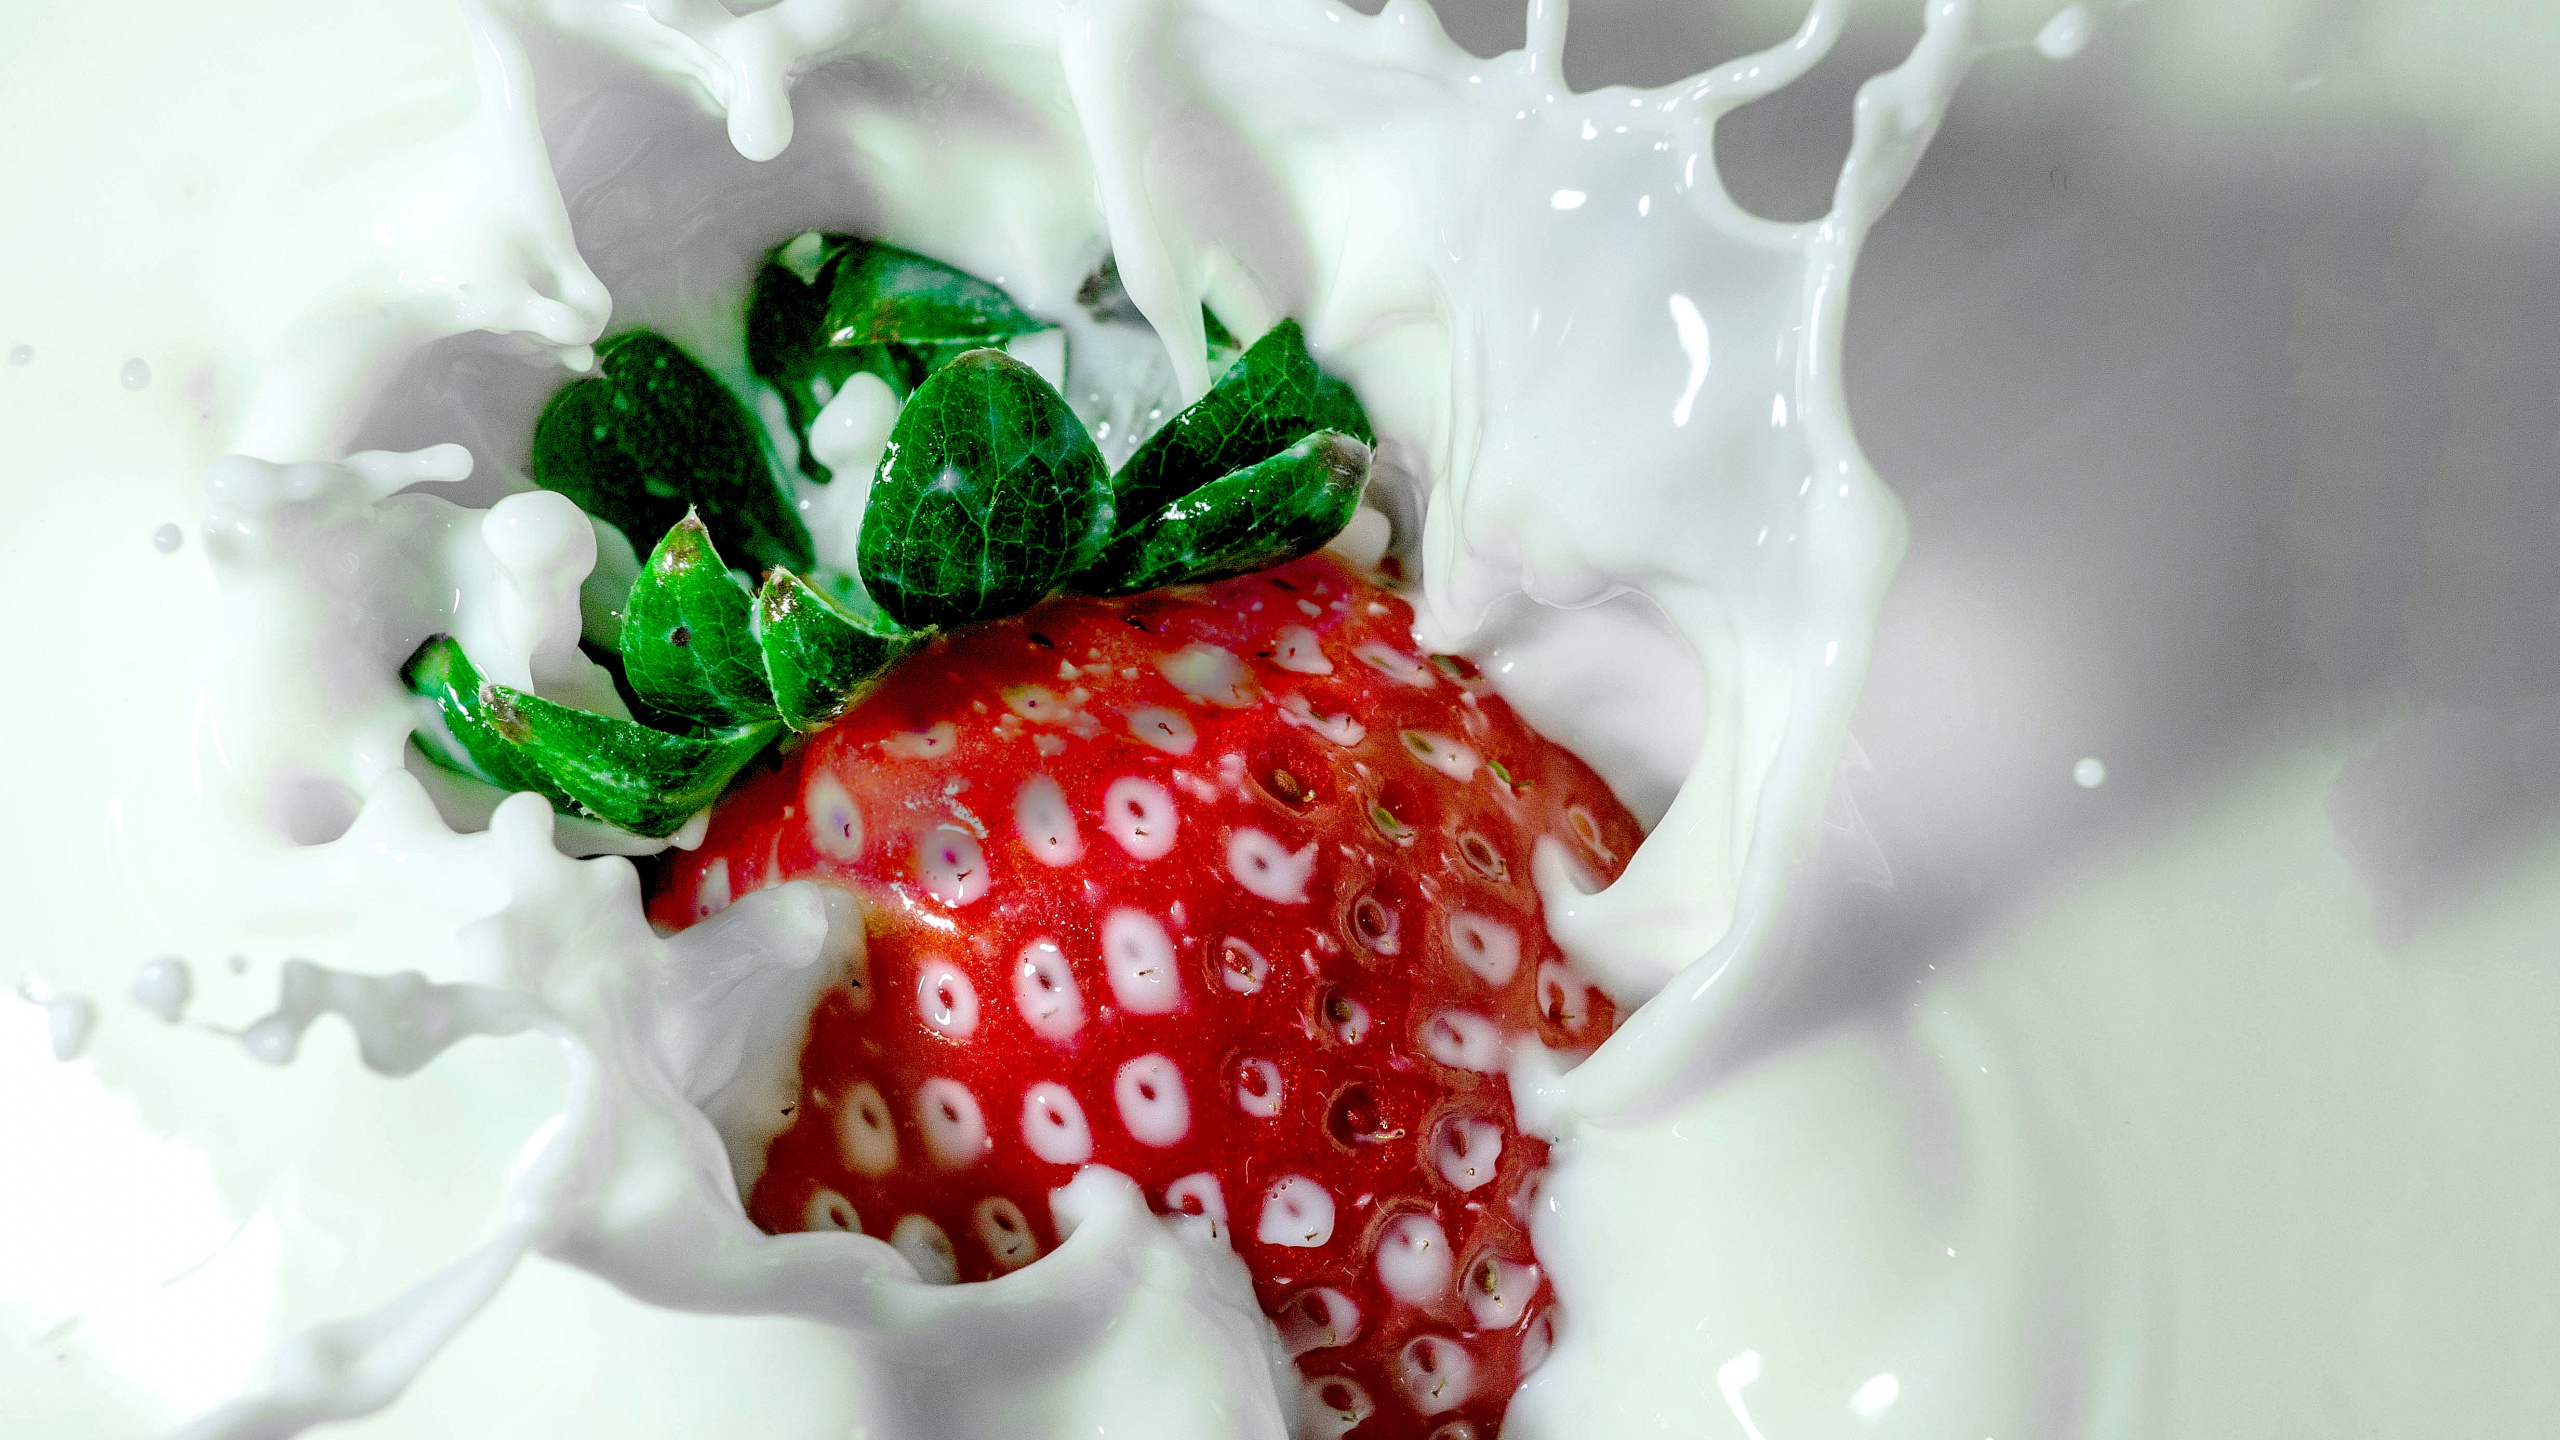 Strawberry on White Ceramic Plate. Wallpaper in 2560x1440 Resolution